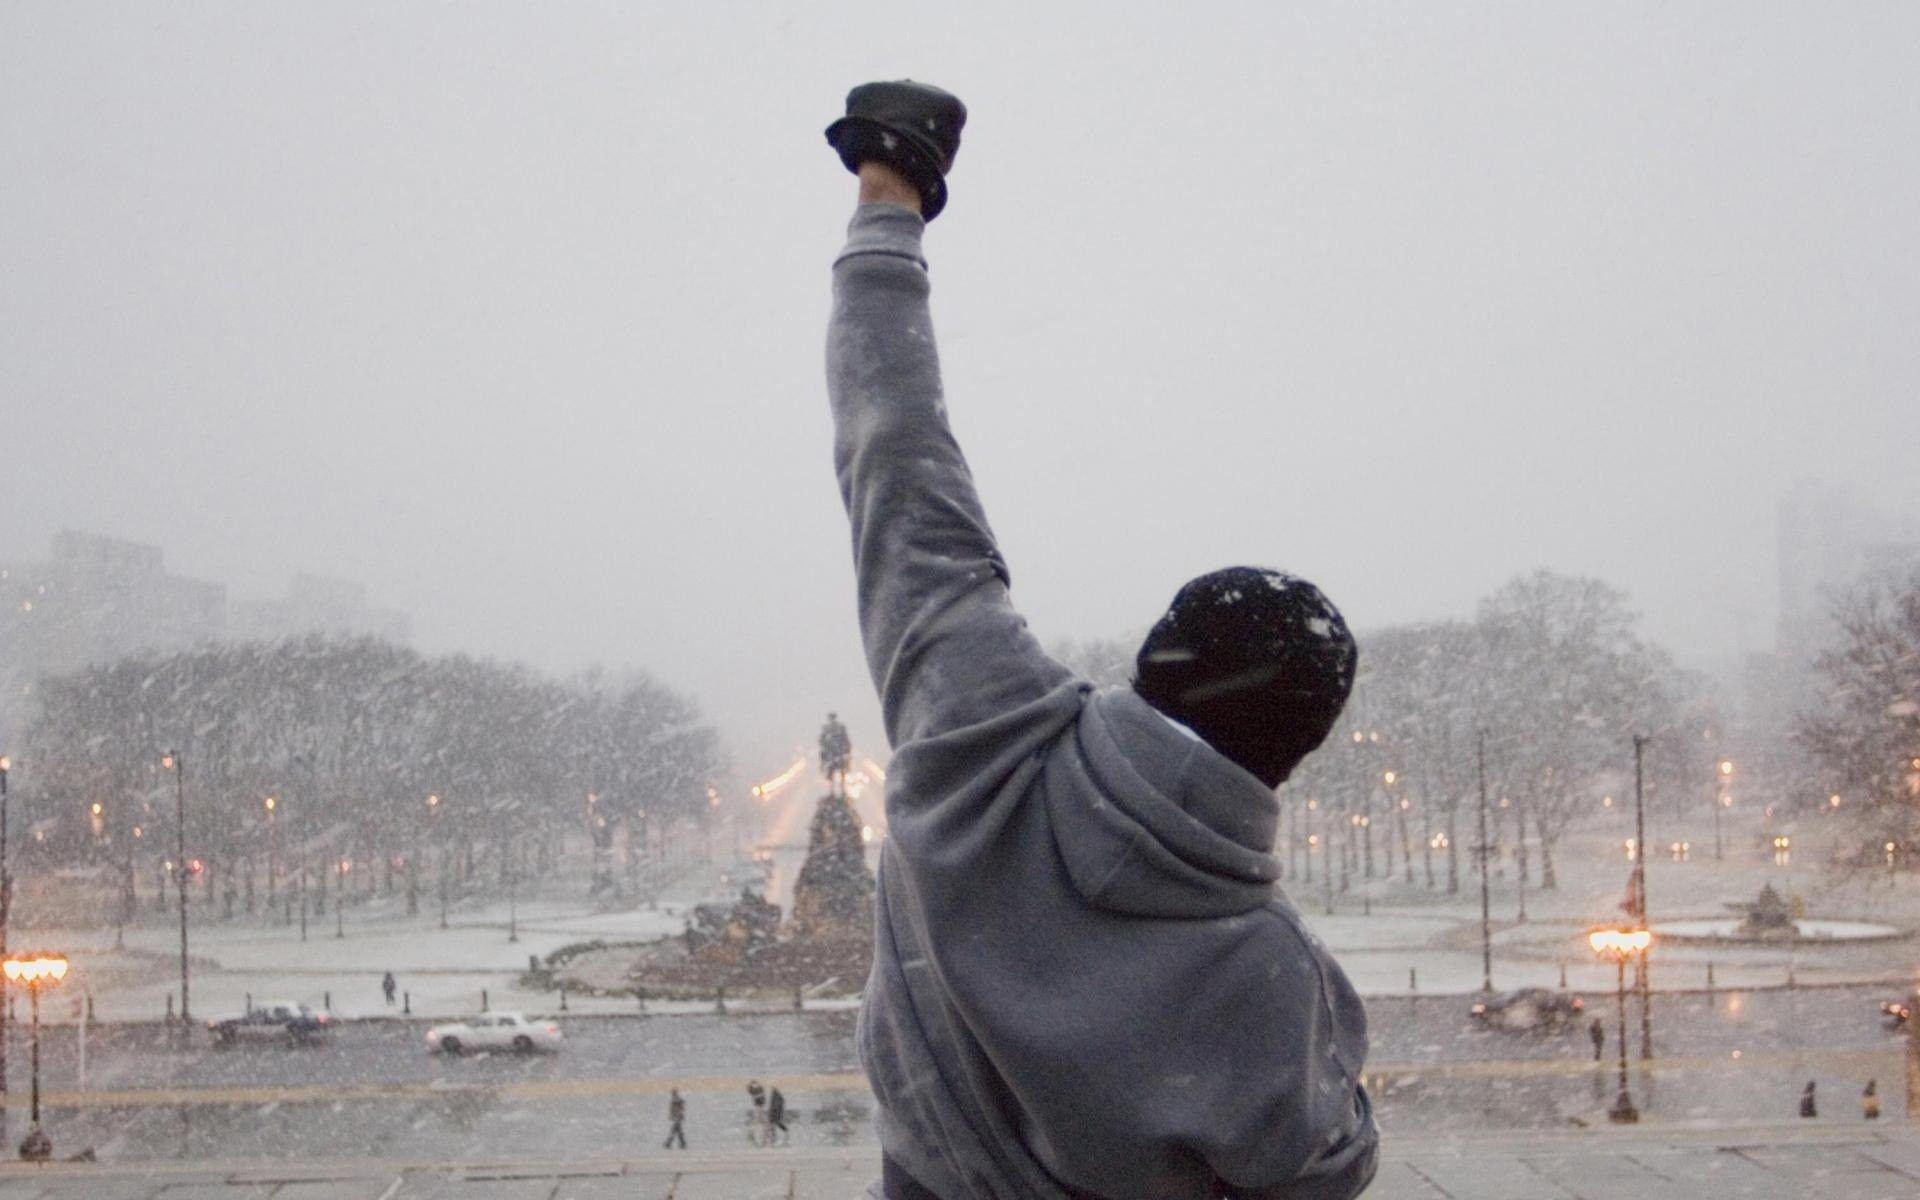 Sylvester Stallone As Rocky Balboa Wallpaper Wide or HD. Male